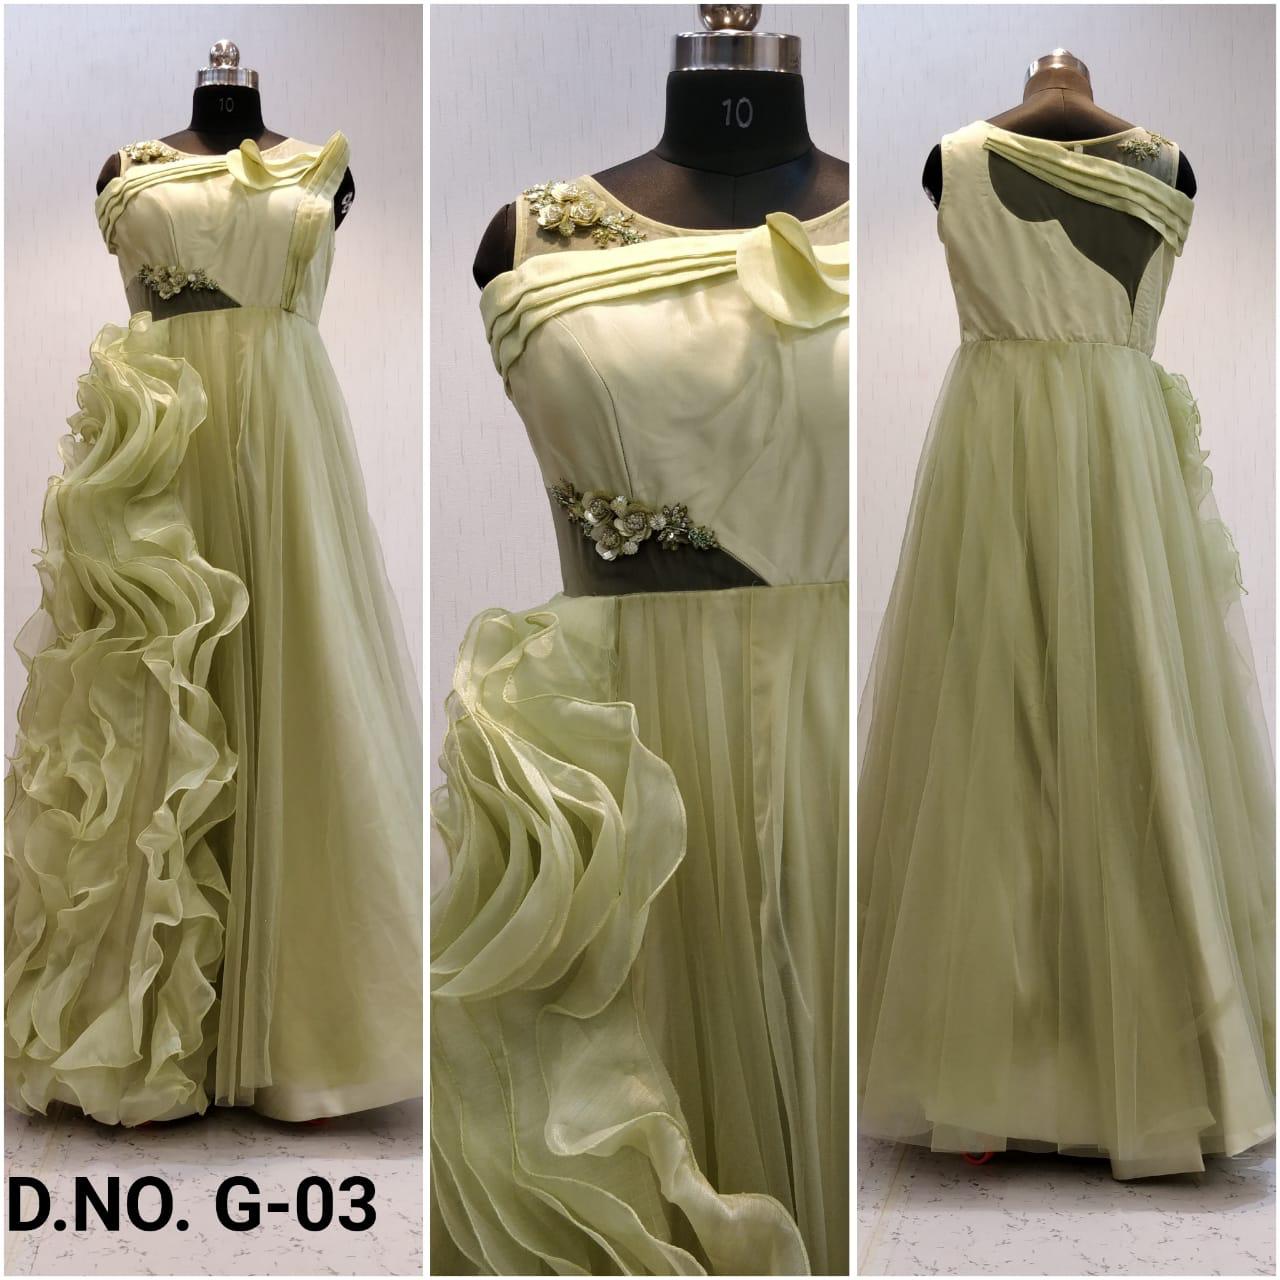 Gown G 03